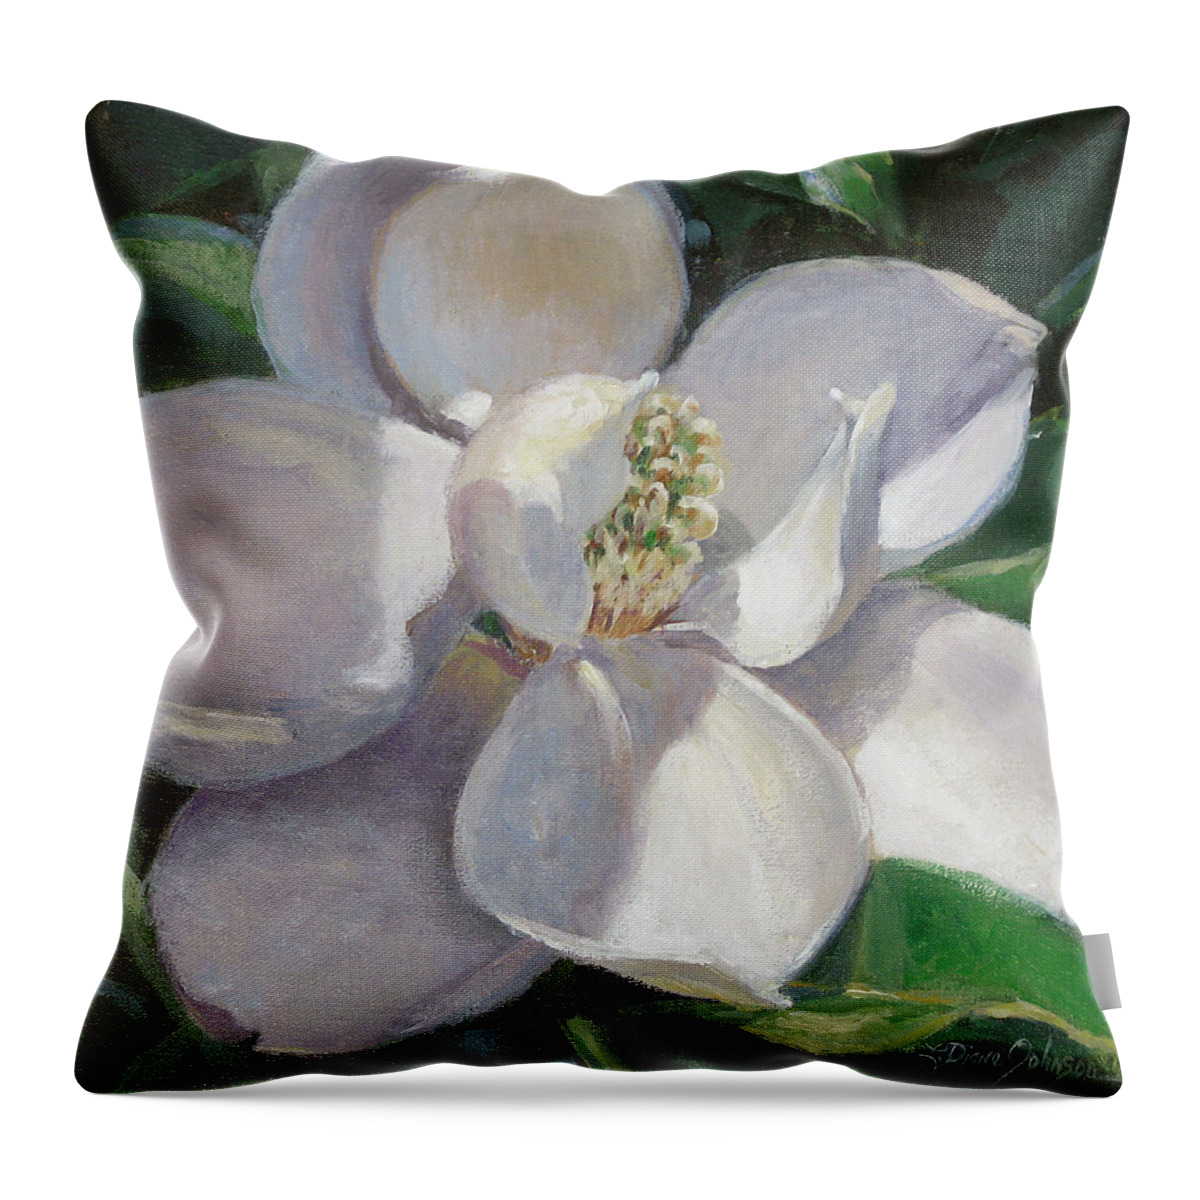 Magnolia Throw Pillow featuring the painting Magnolia by L Diane Johnson